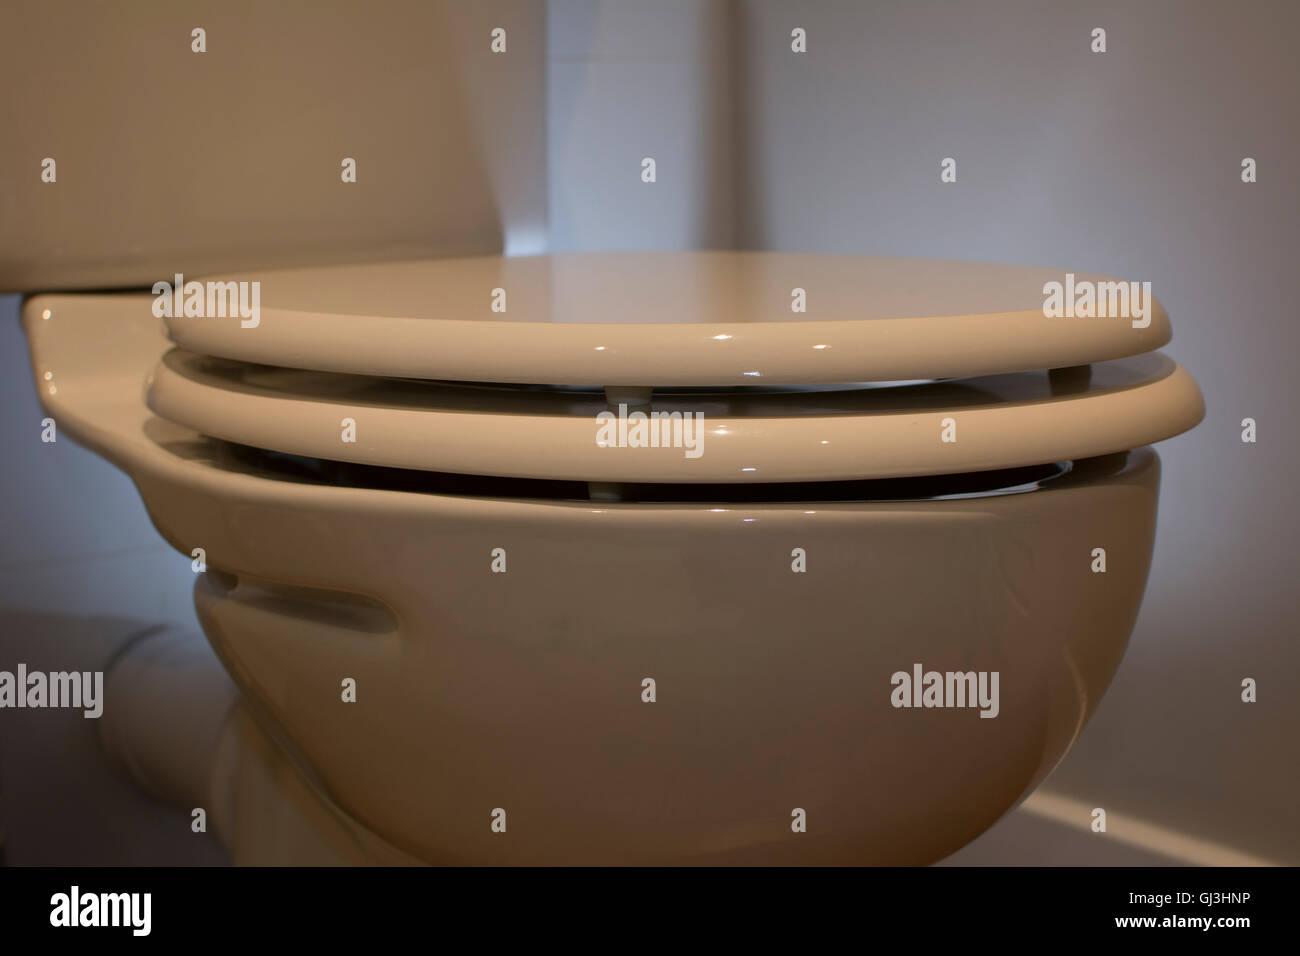 Clean looking back lit toilet bowl Stock Photo